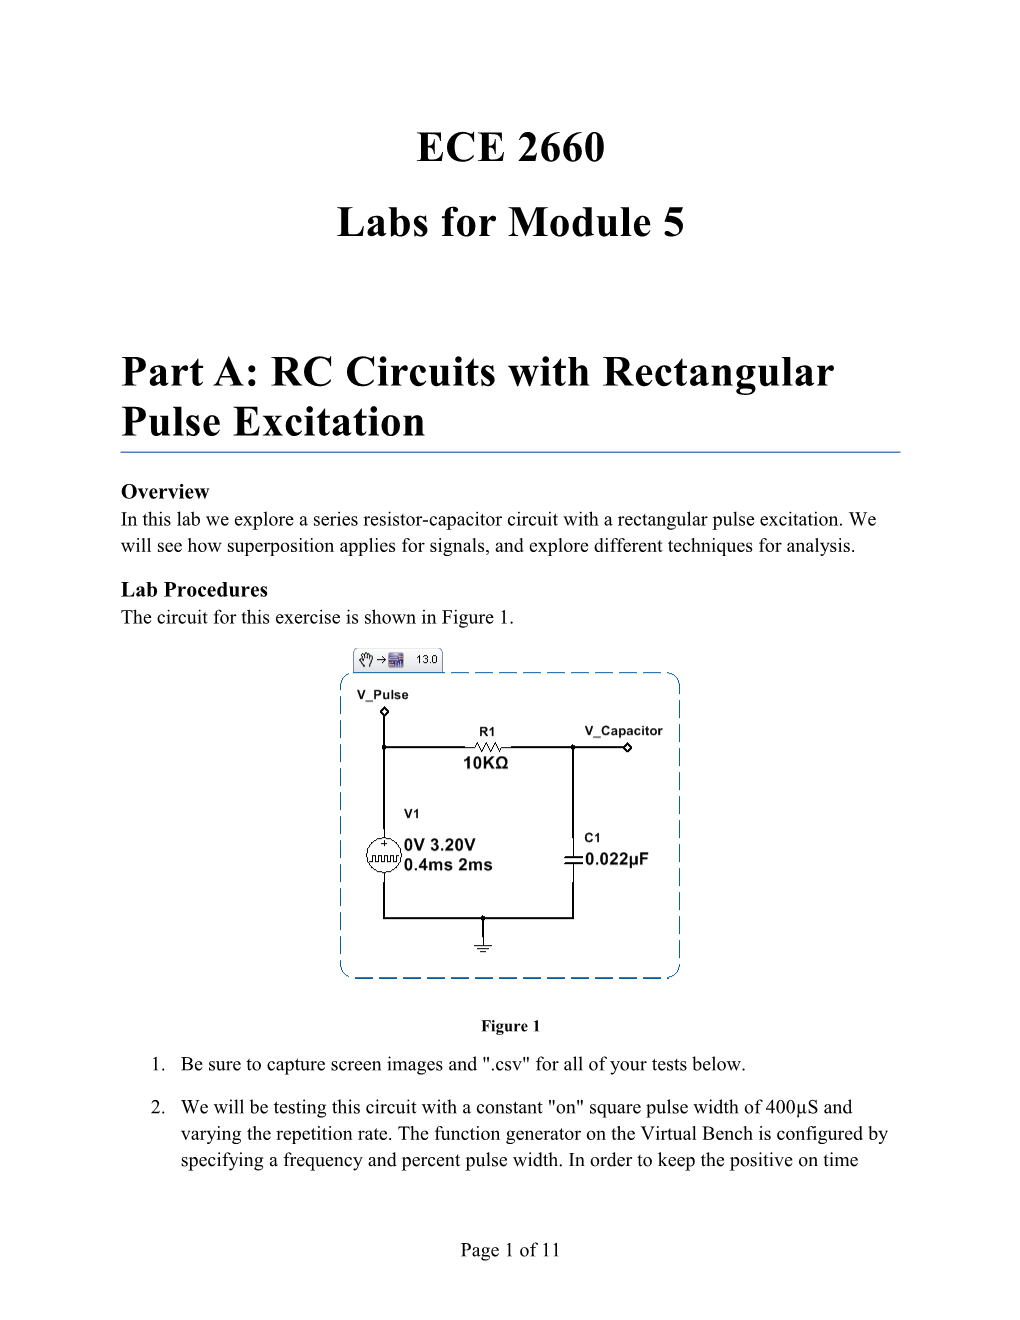 Part A: RC Circuits with Rectangular Pulse Excitation